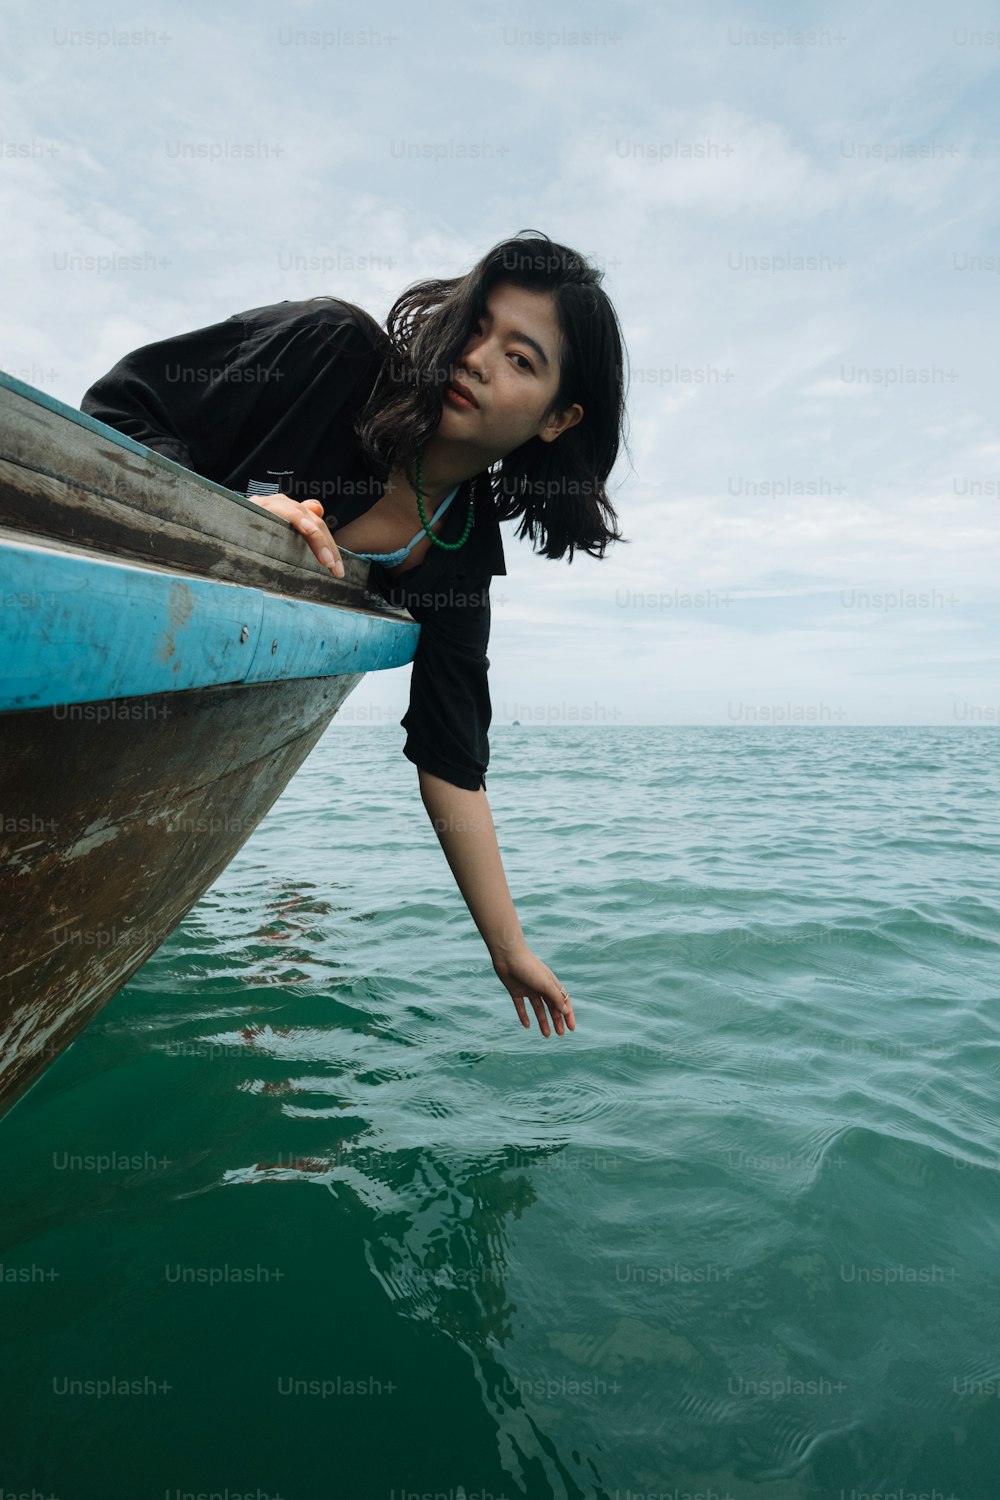 a woman leaning over the edge of a boat in the water